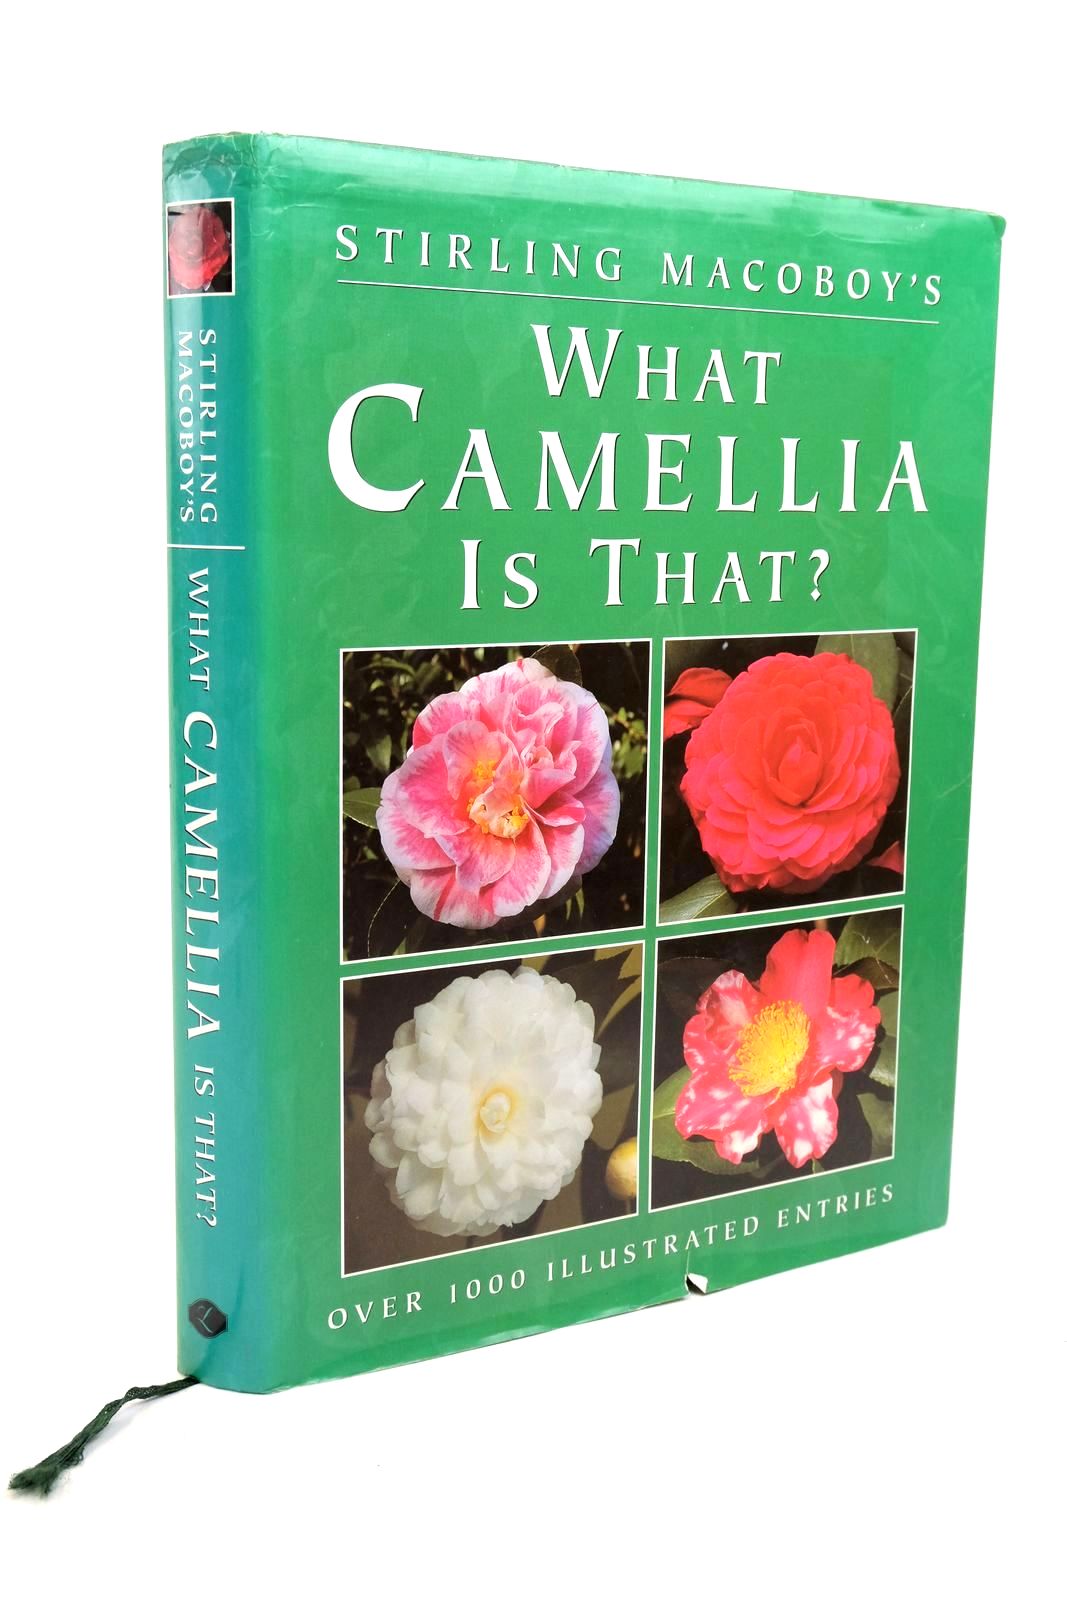 Photo of STIRLING MACOBOY'S WHAT CAMELLIA IS THAT? written by Macoboy, Stirling Mann, Roger published by Lansdowne Publishing Pty Ltd (STOCK CODE: 1323096)  for sale by Stella & Rose's Books